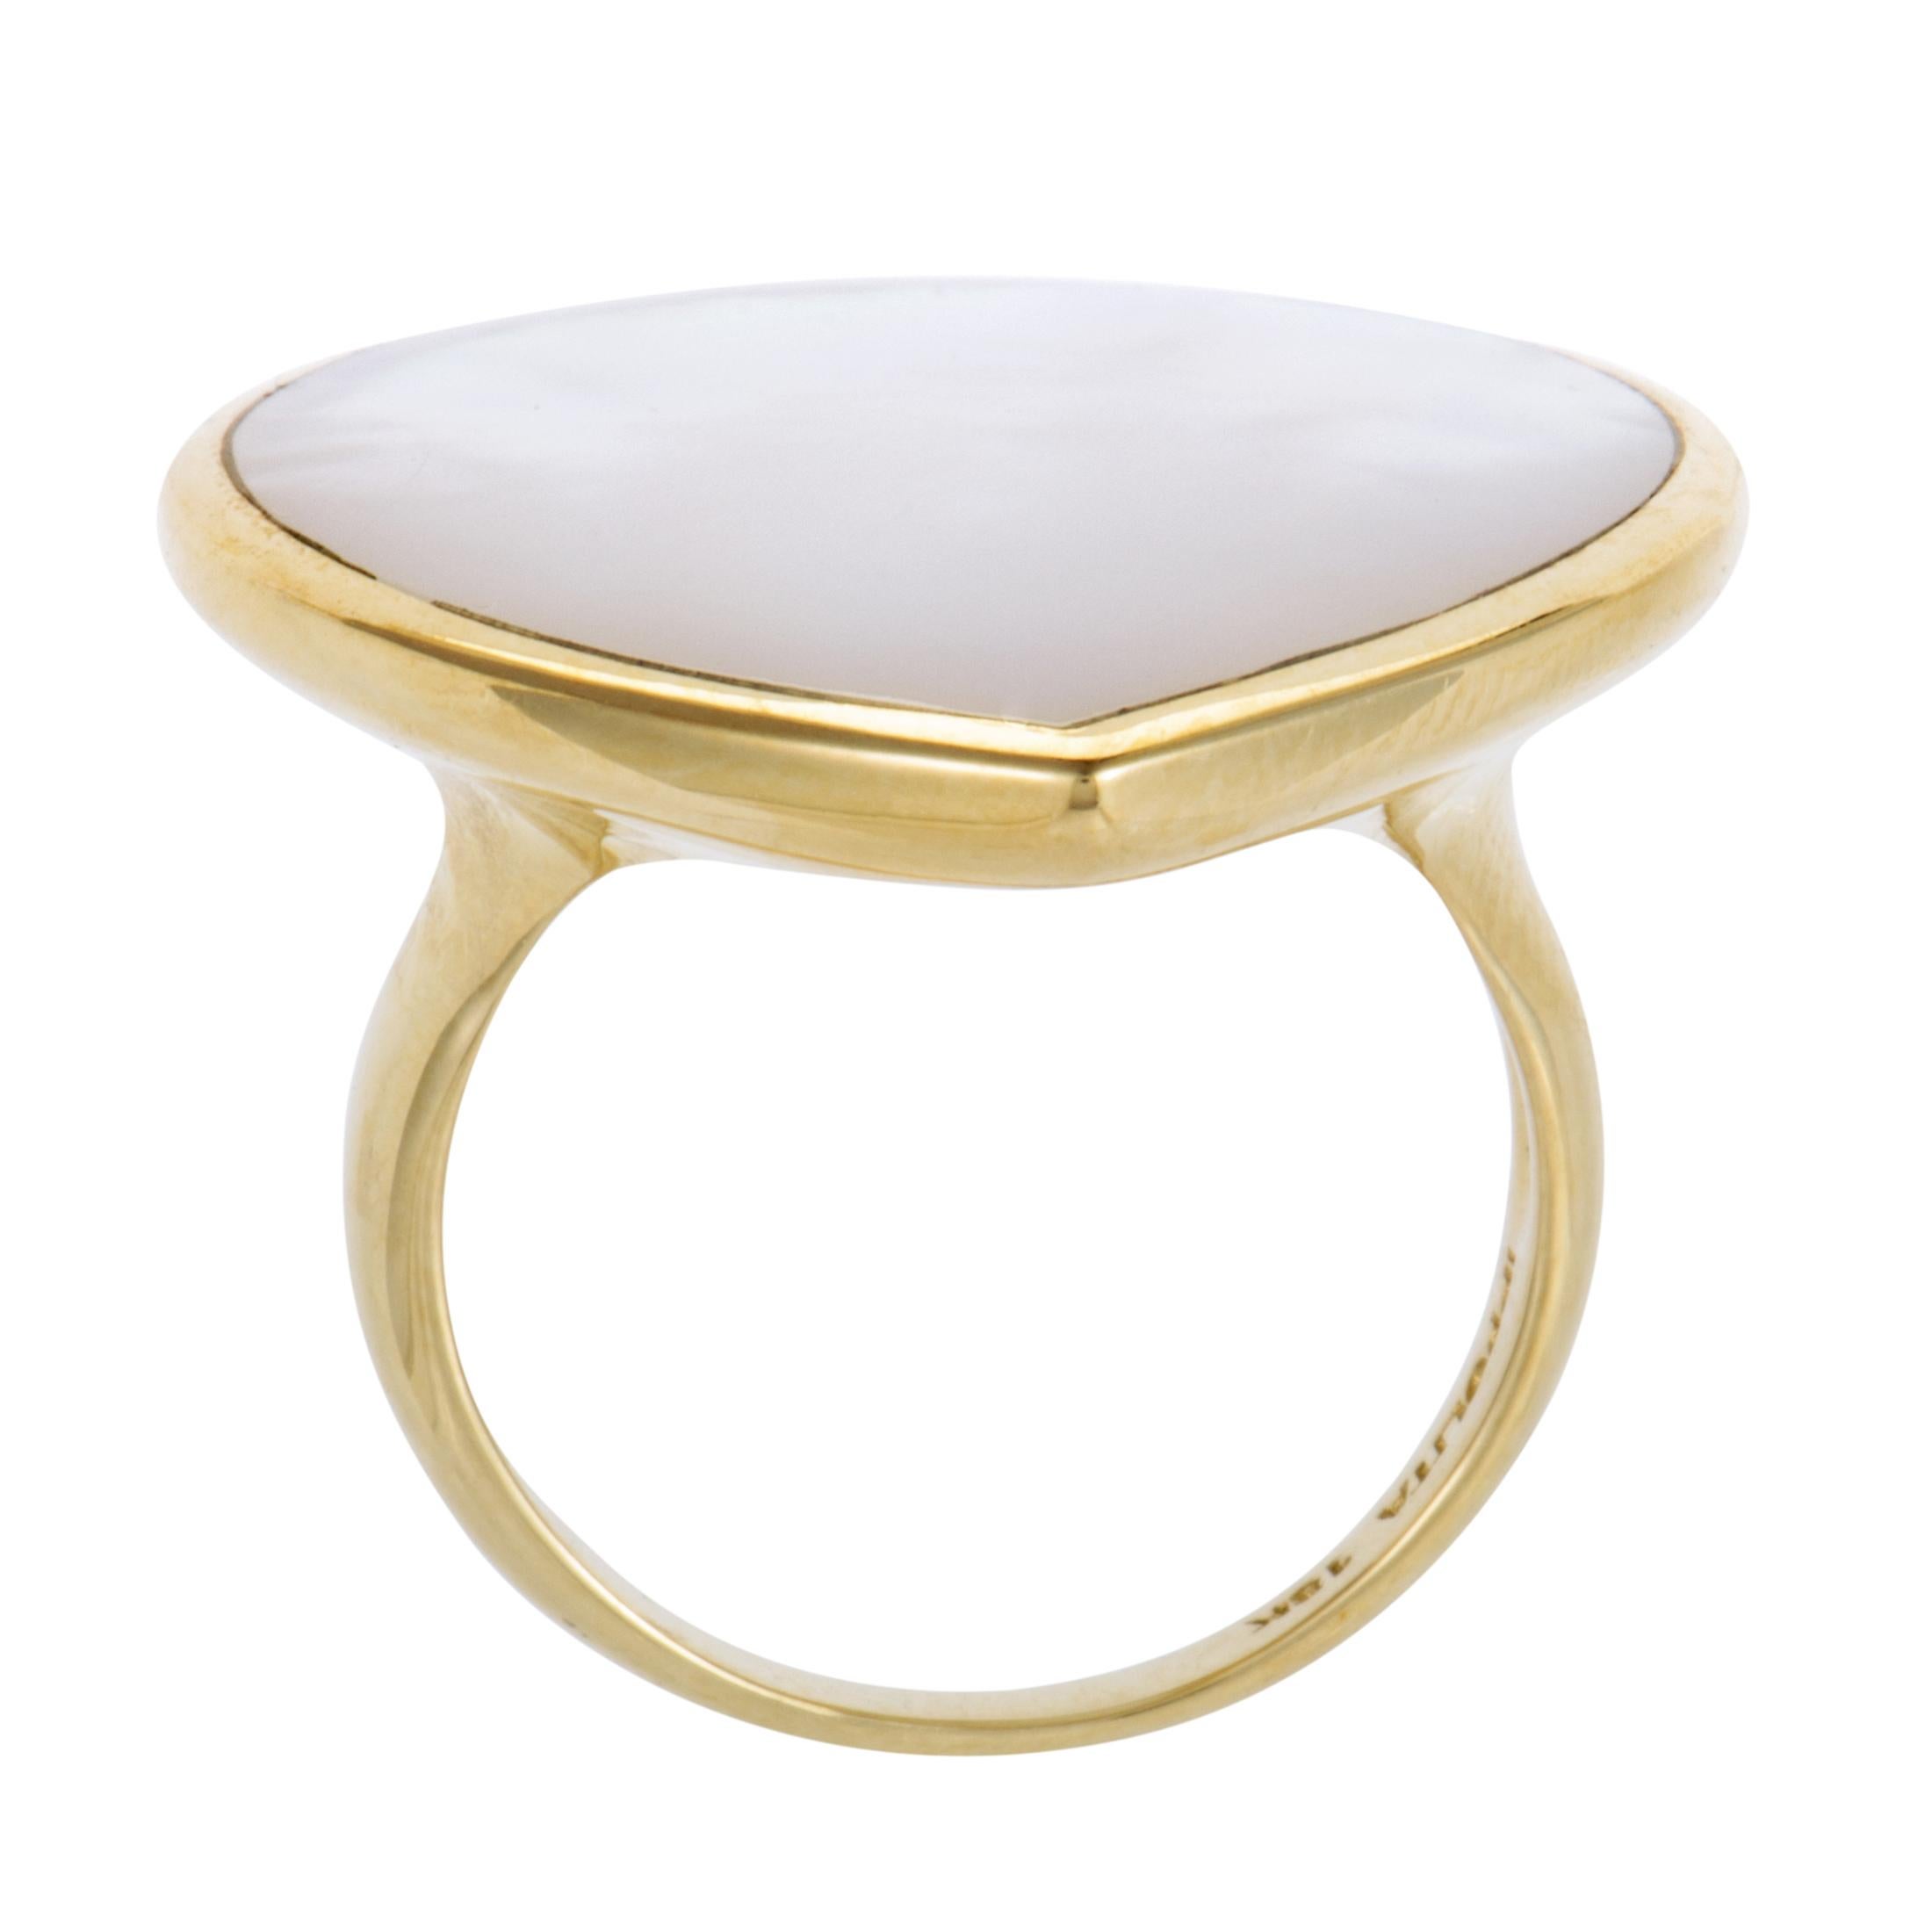 This exceptionally beautiful teardrop ring from Ippolita is an utterly elegant addition to its brilliant “Rock Candy” collection. It gorgeously features the ever-compelling combination of the incredibly resplendent mother-of-pearl and the